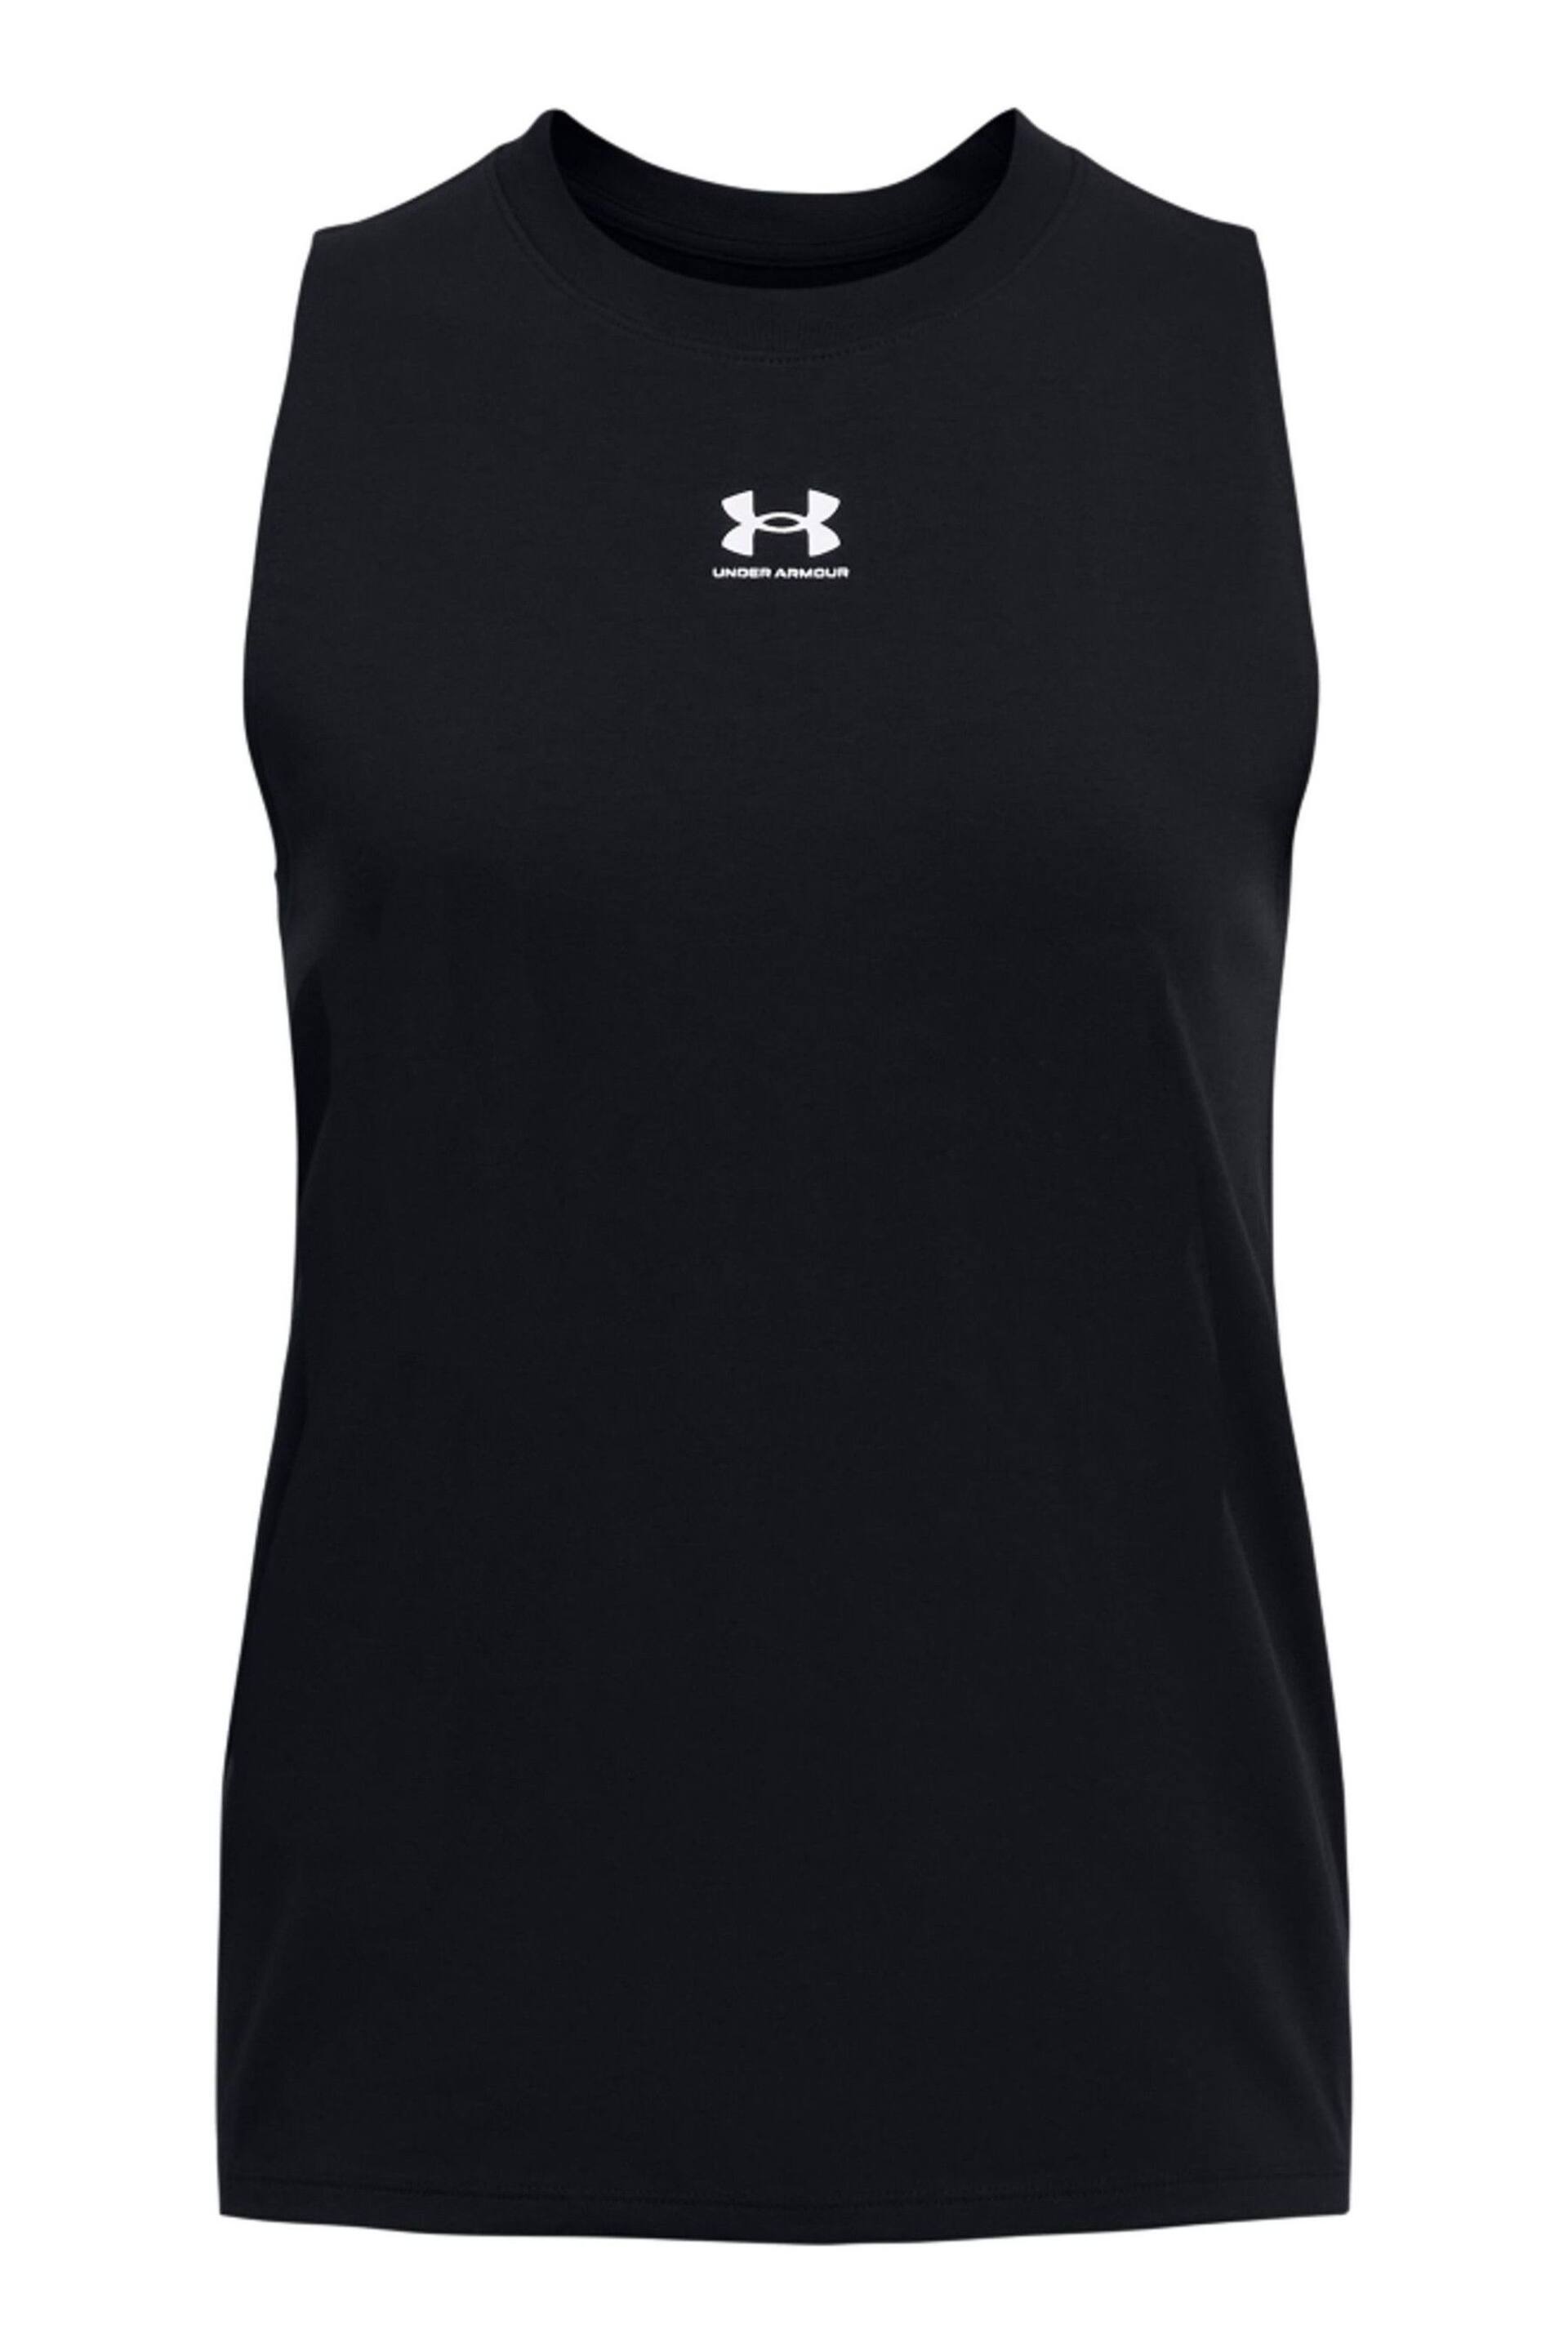 Under Armour Black Campus Muscle Vest - Image 5 of 6